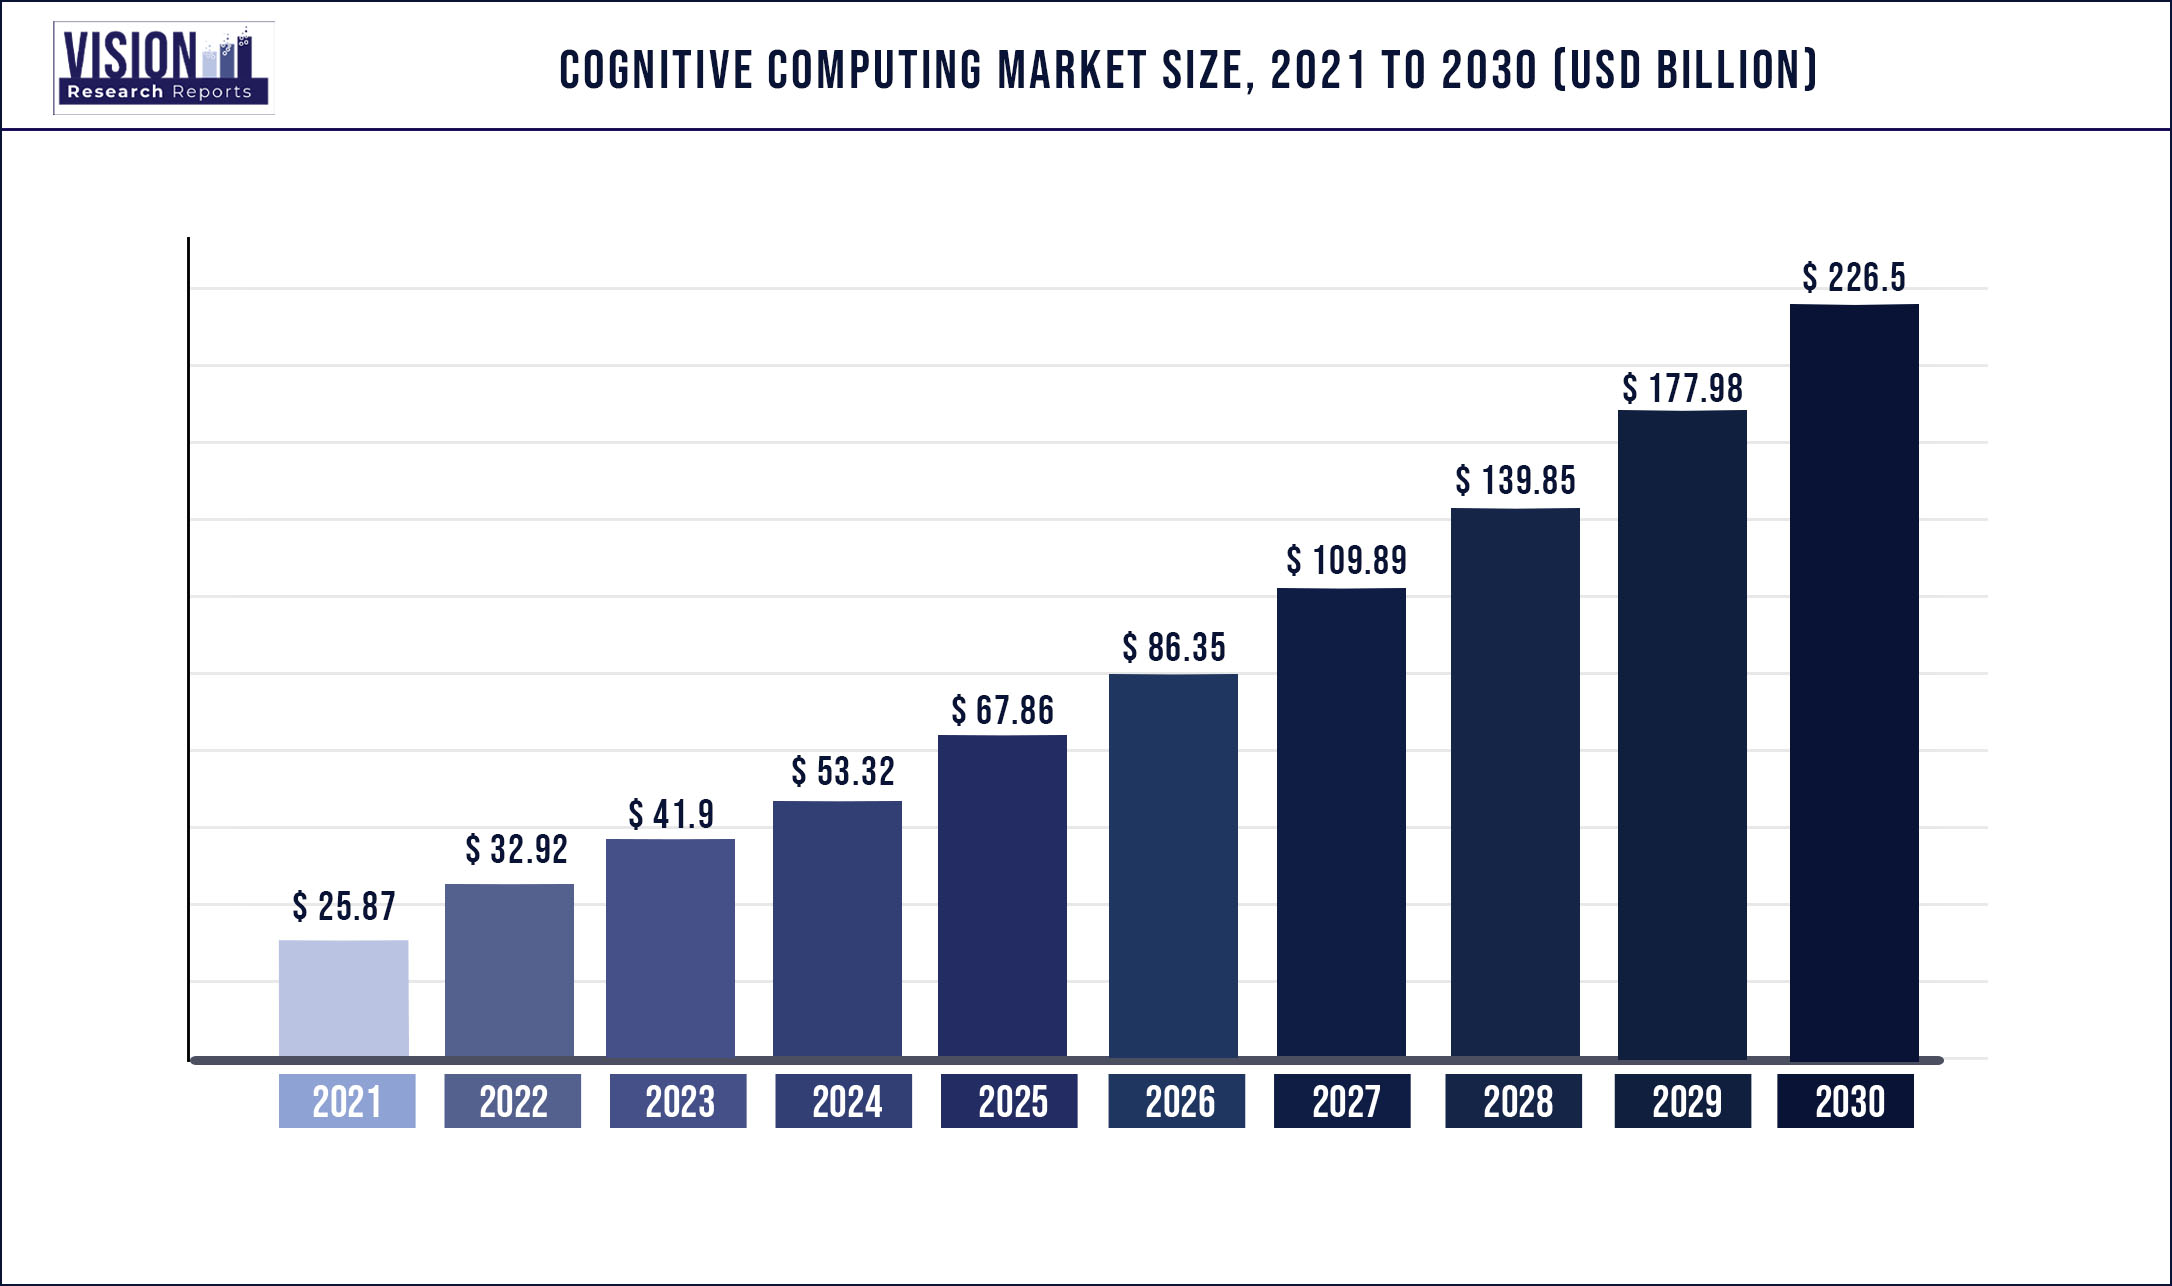 Cognitive Computing Market Size 2021 to 2030